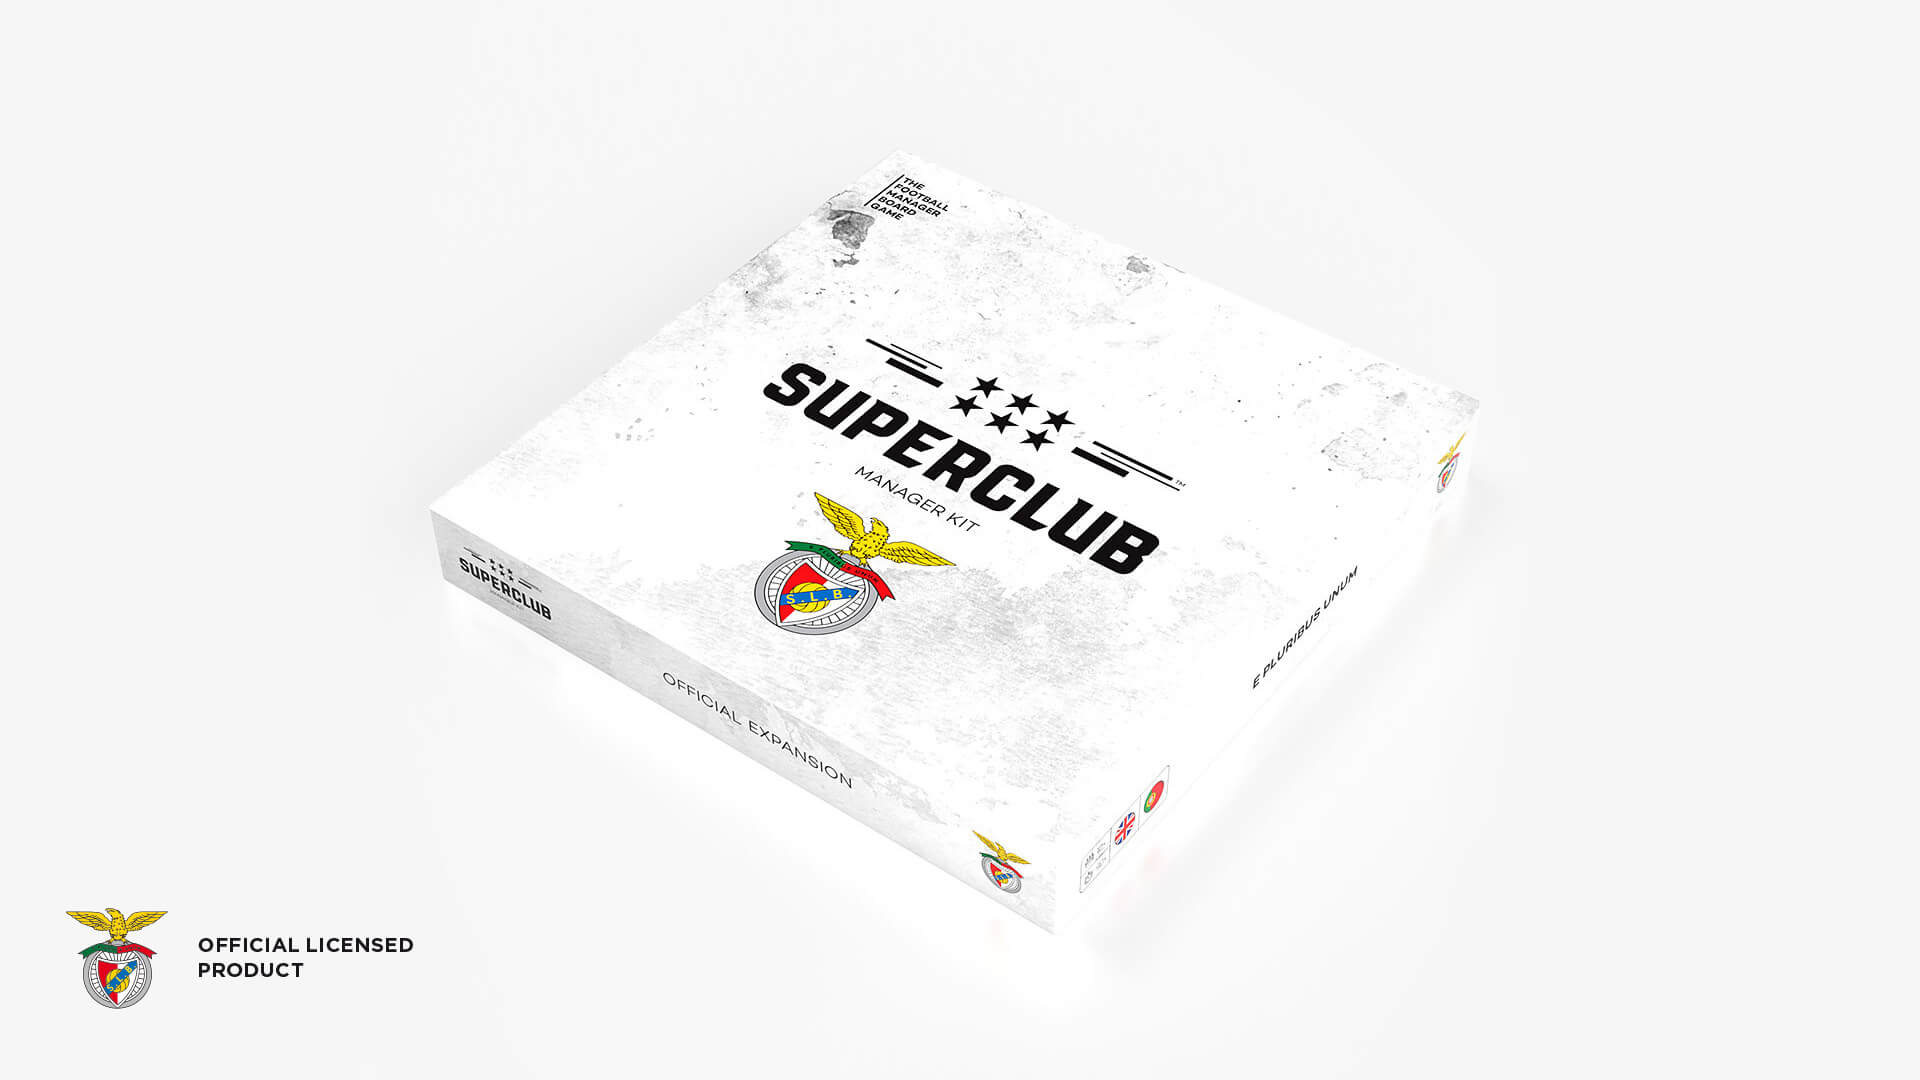 Portuguese powerhouse S.L. Benfica will join the Superclub family